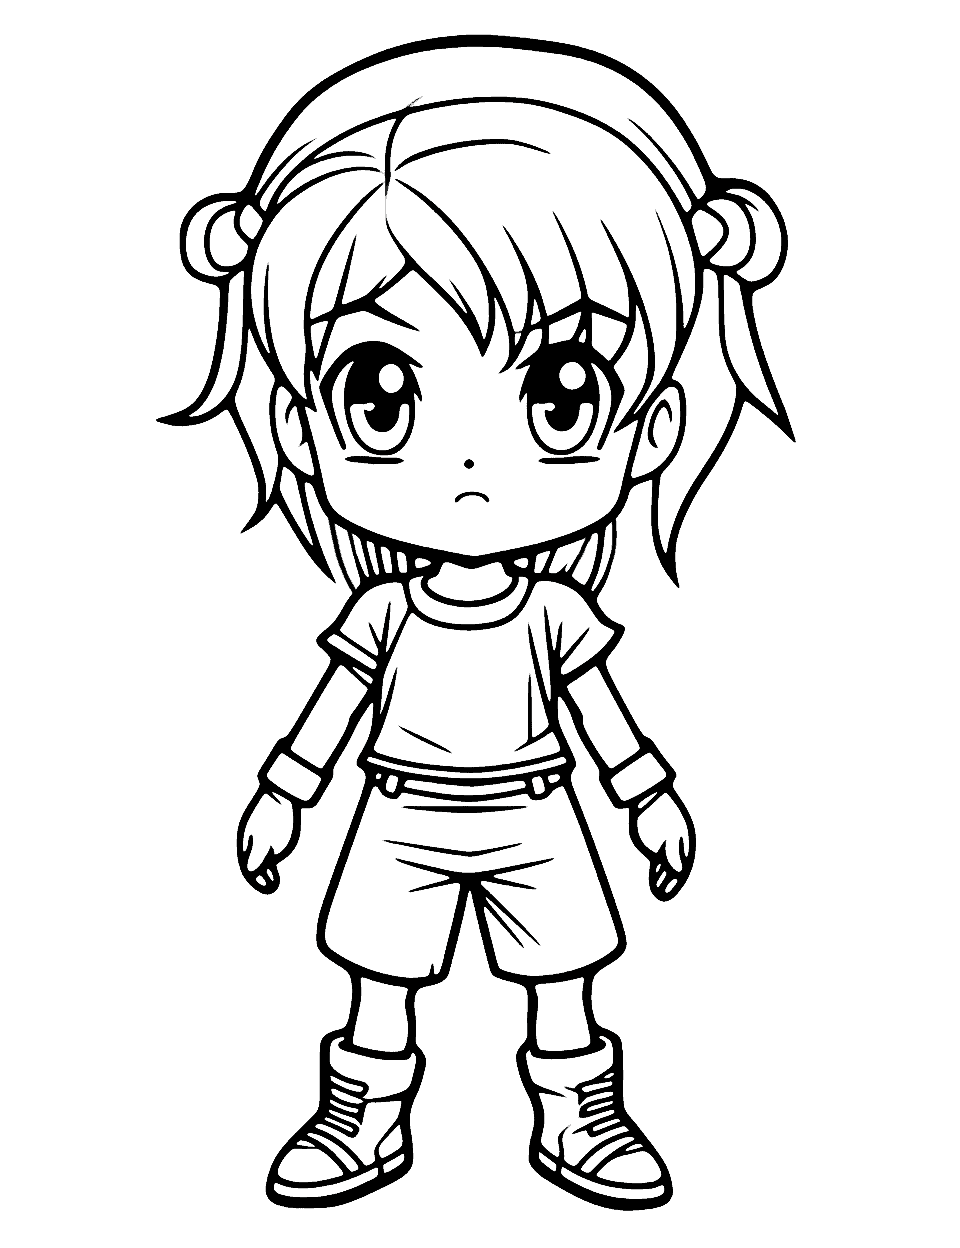 Anime coloring pages free printable sheets